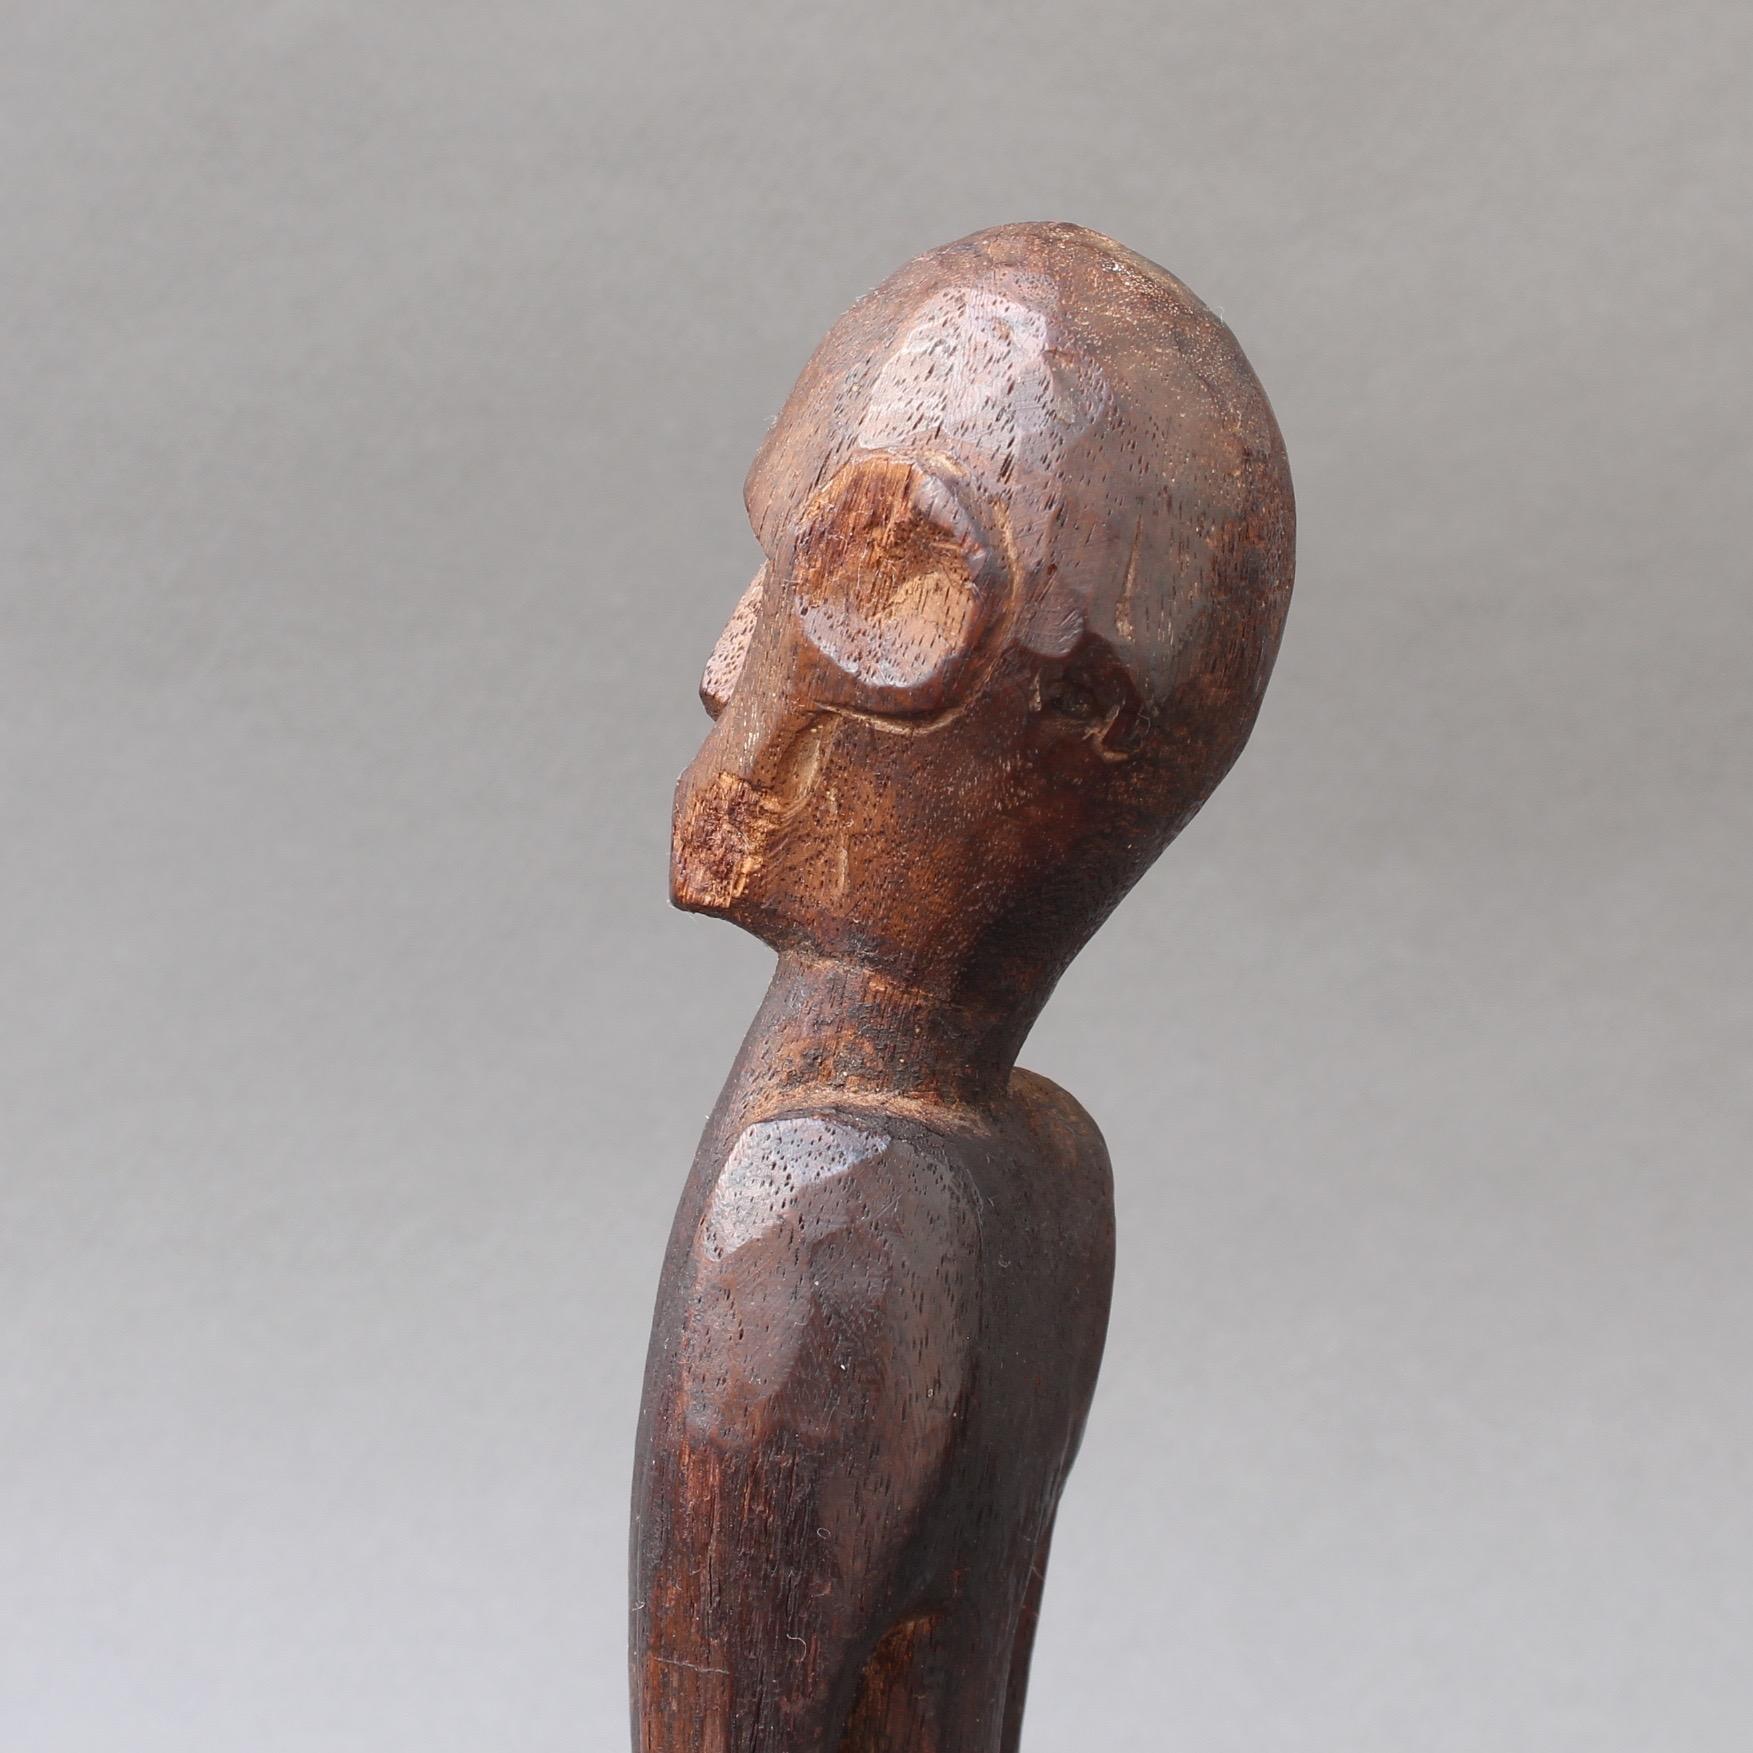 Wooden Sculpture or Carving of Sitting Figure from Sumba Island, Indonesia 6